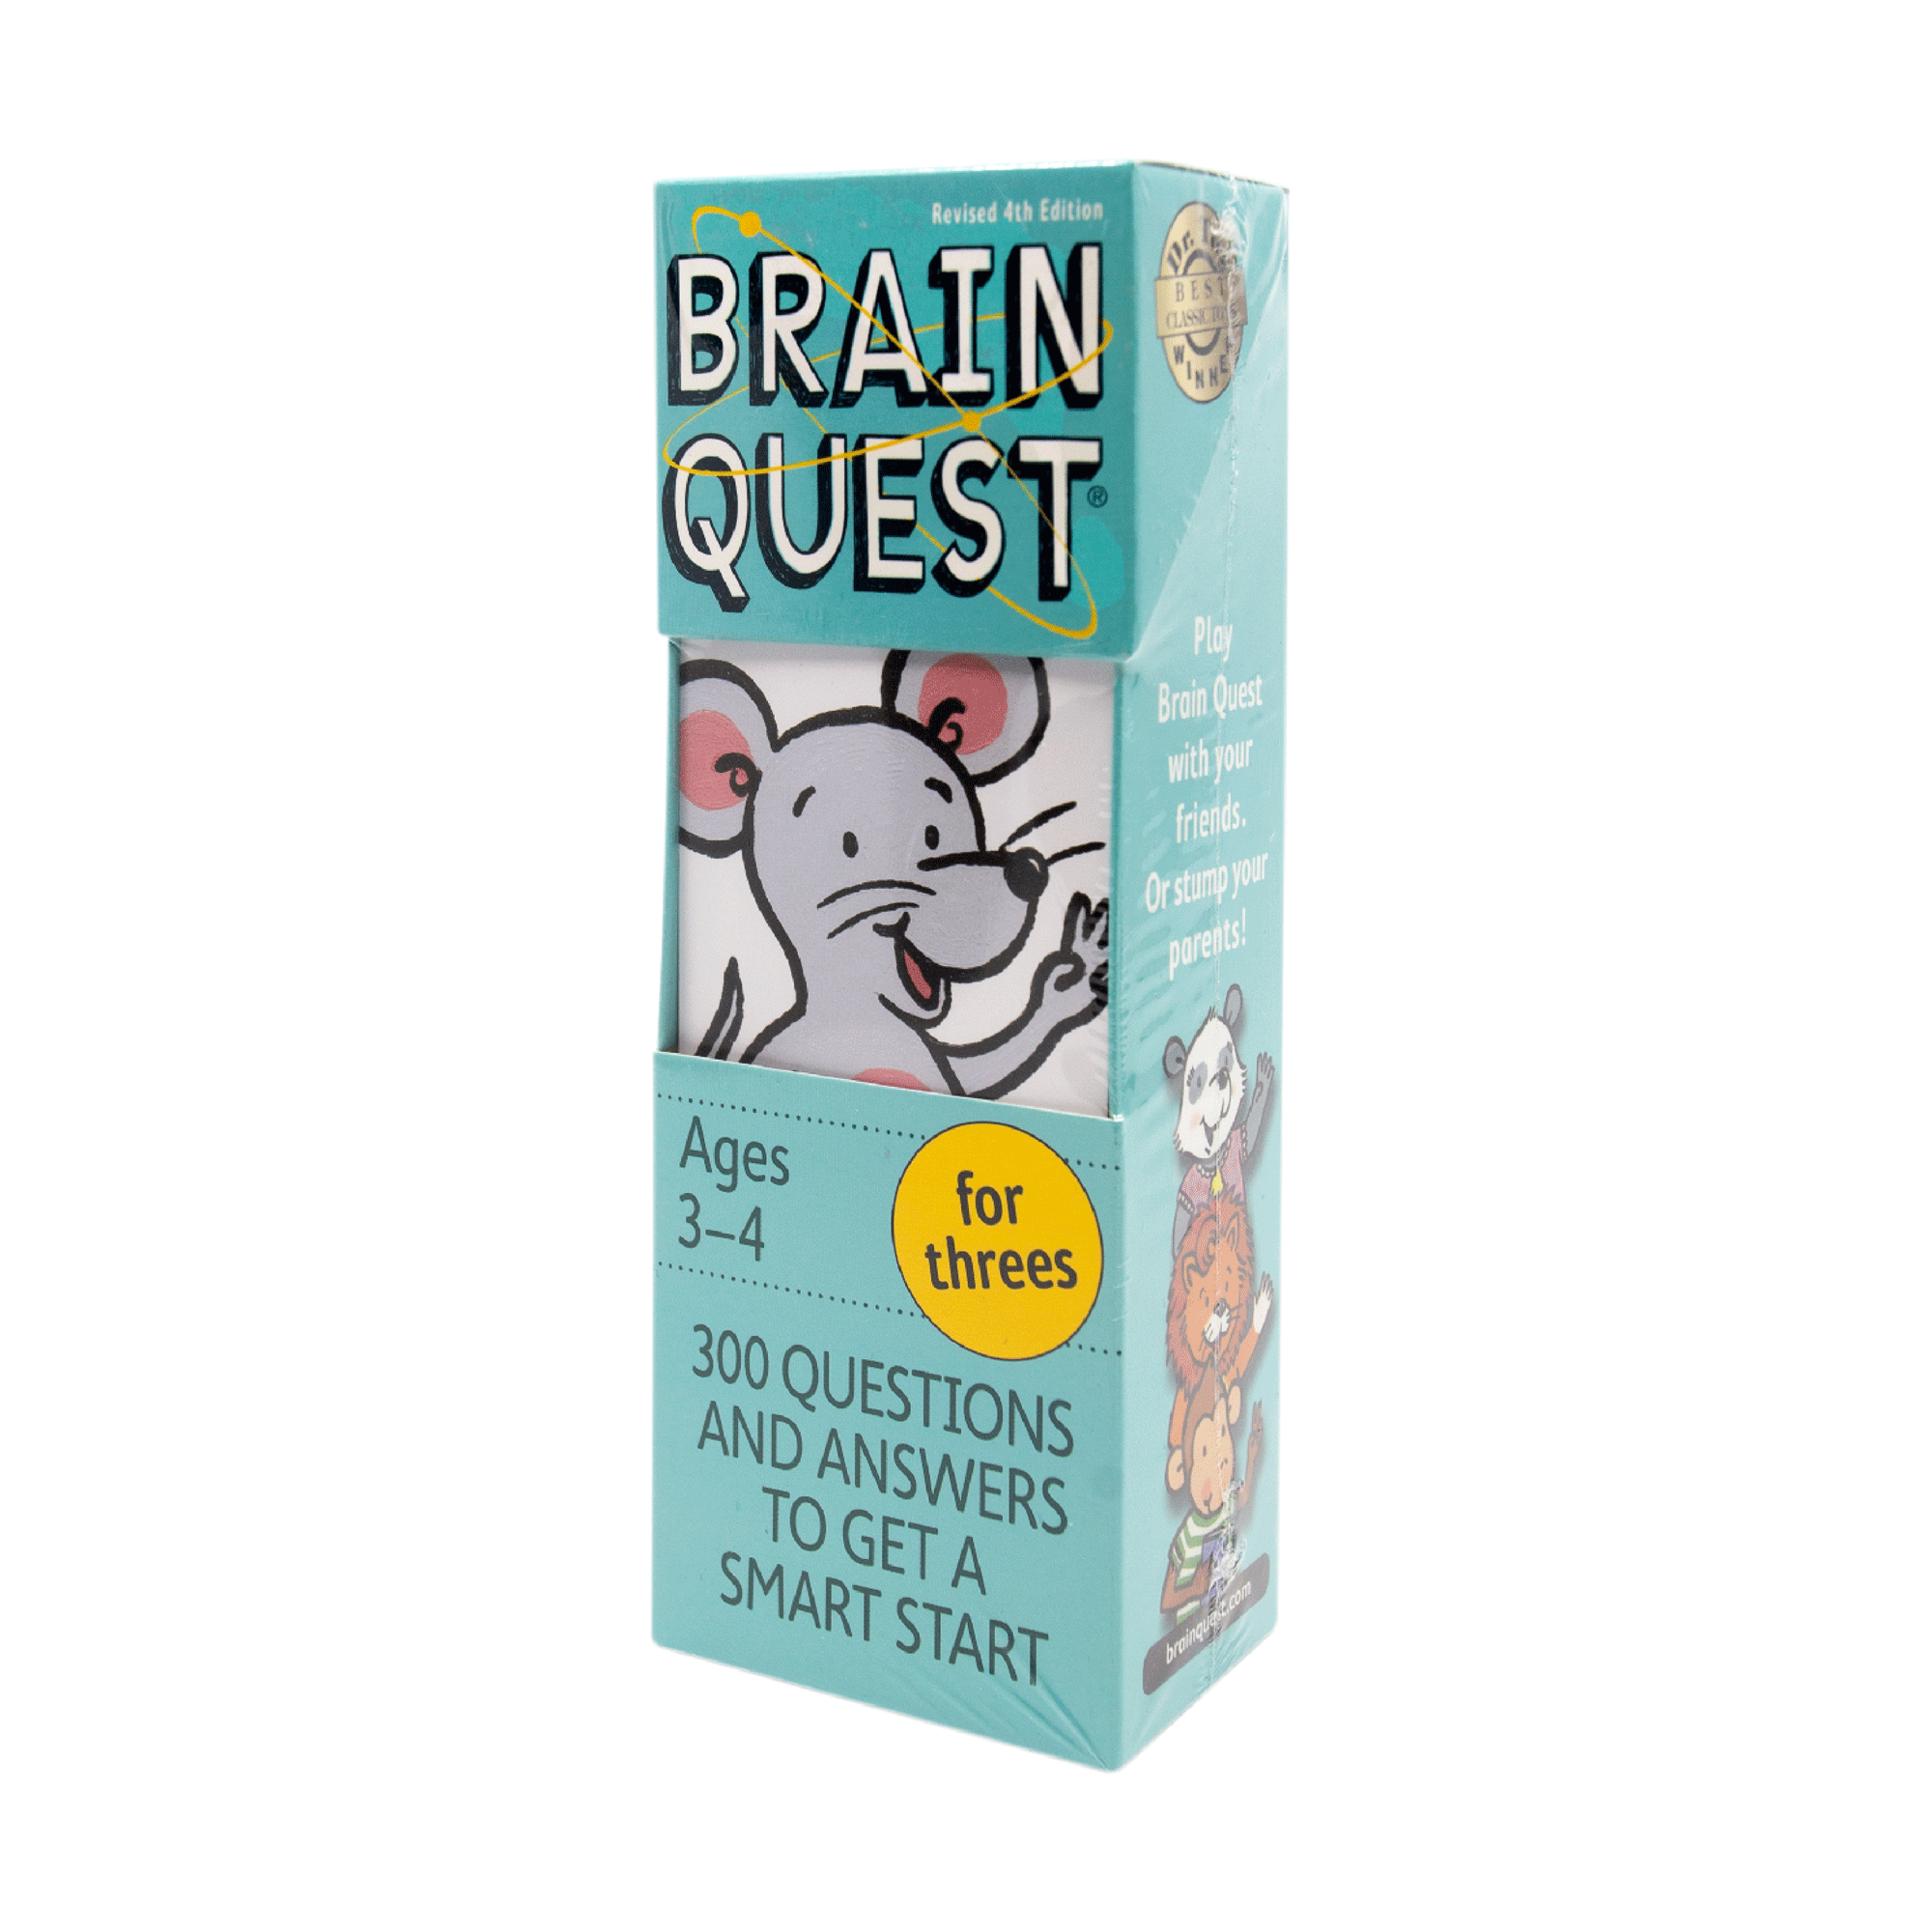 BRAIN QUEST FOR THREES -SCIENCE STORE AT SCIENCE WORLD – Science